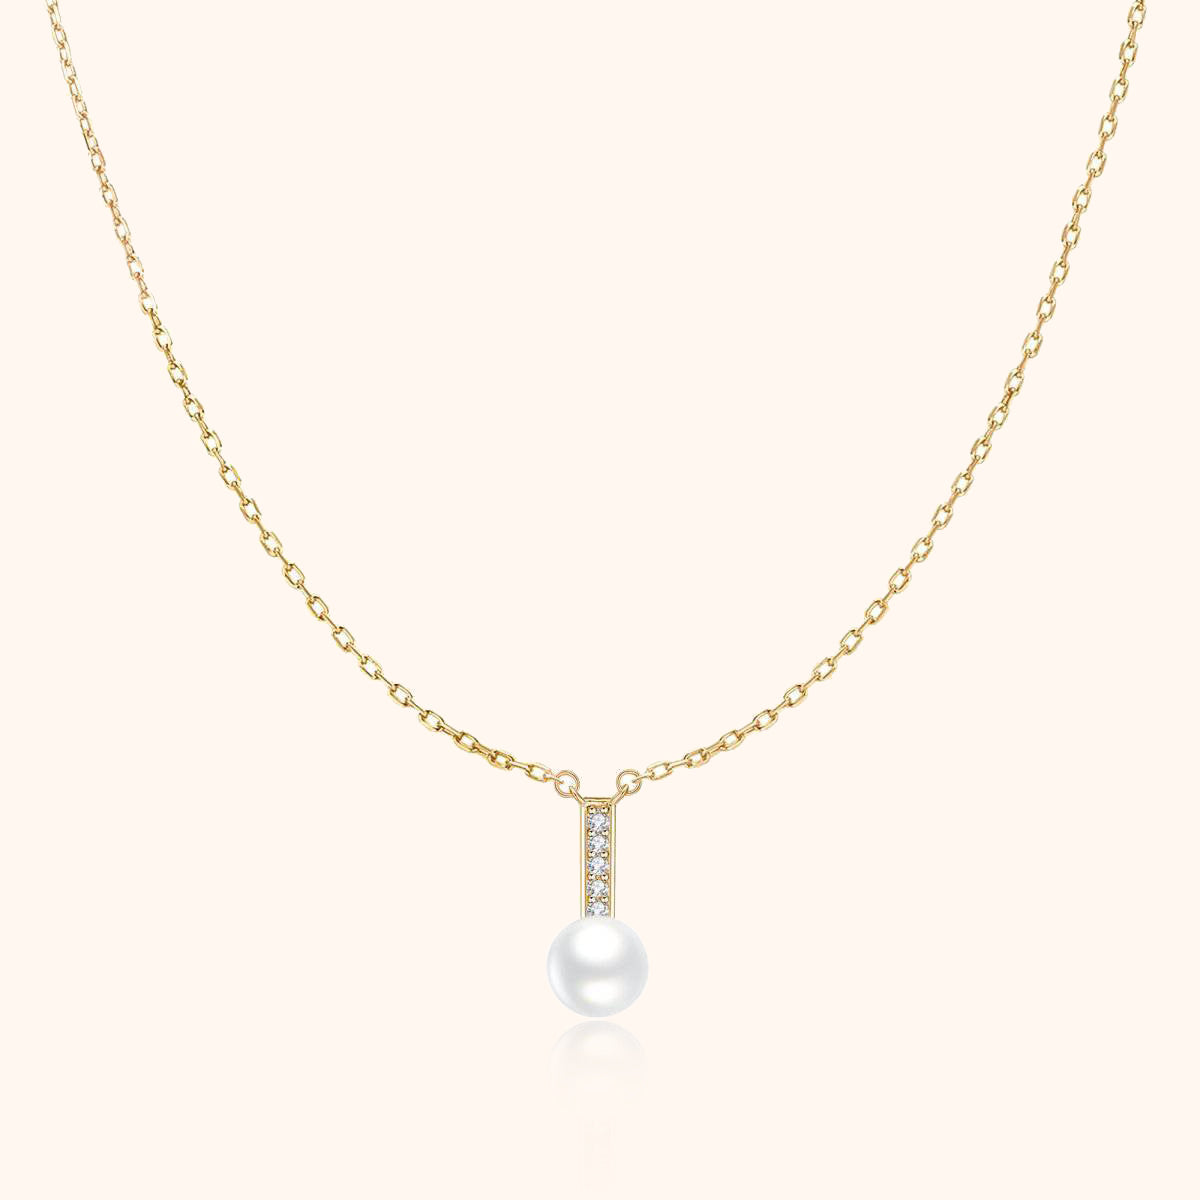 "Shining Pearl" Necklace